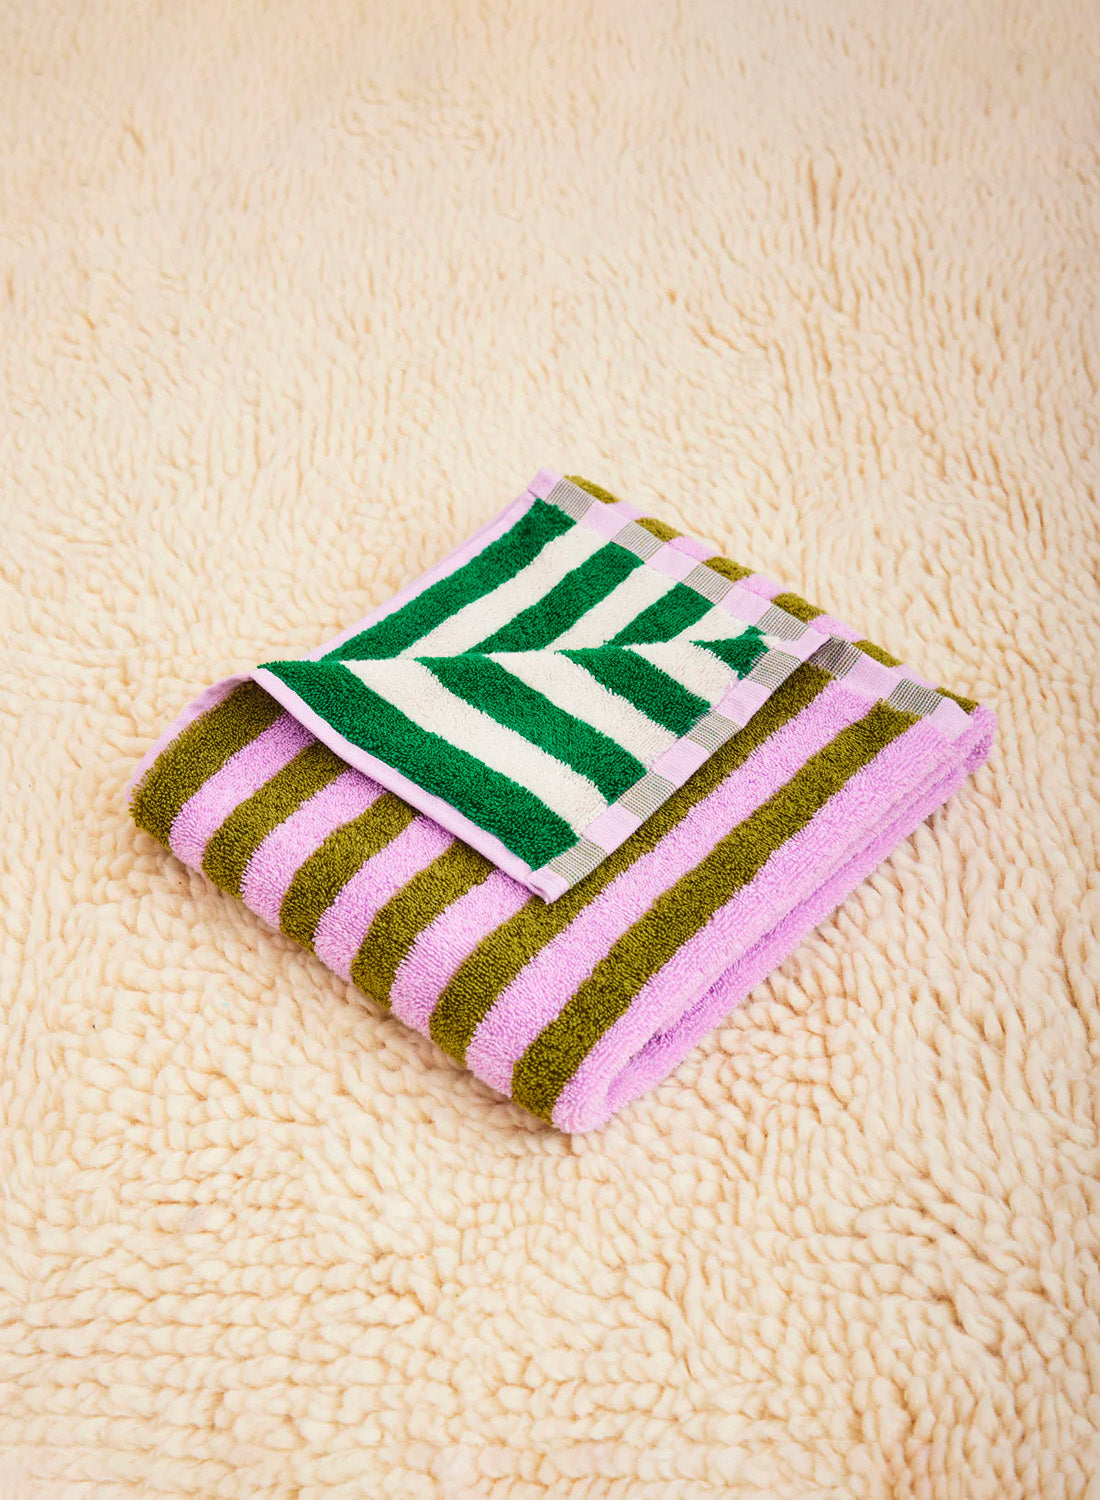 Oeko-Tex Towels Earth Collection